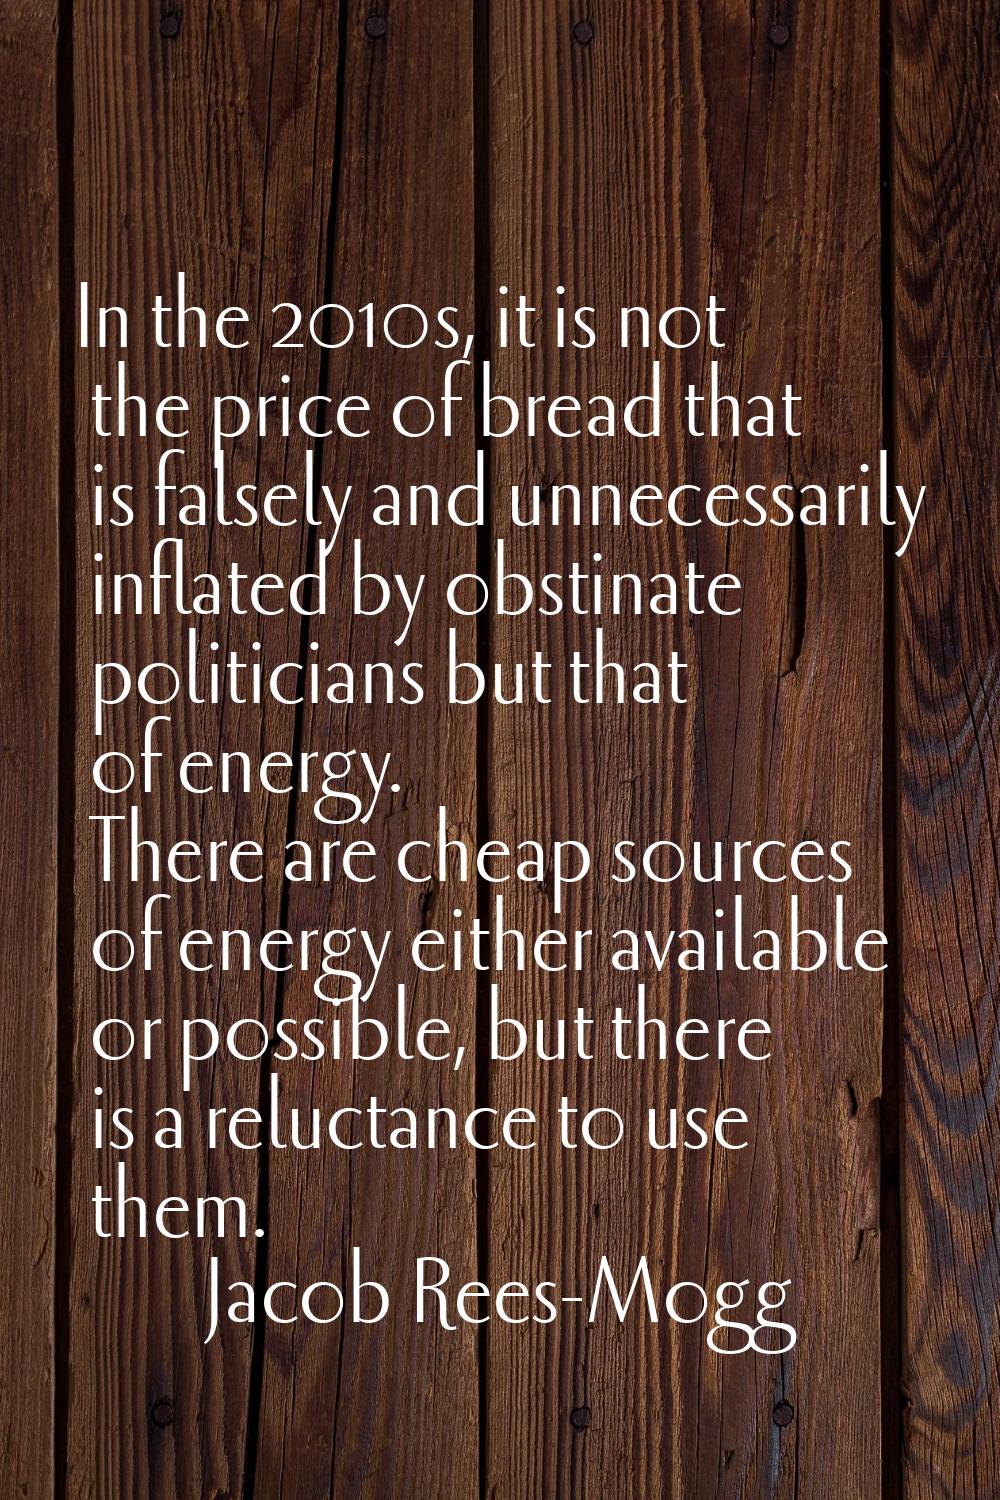 In the 2010s, it is not the price of bread that is falsely and unnecessarily inflated by obstinate 